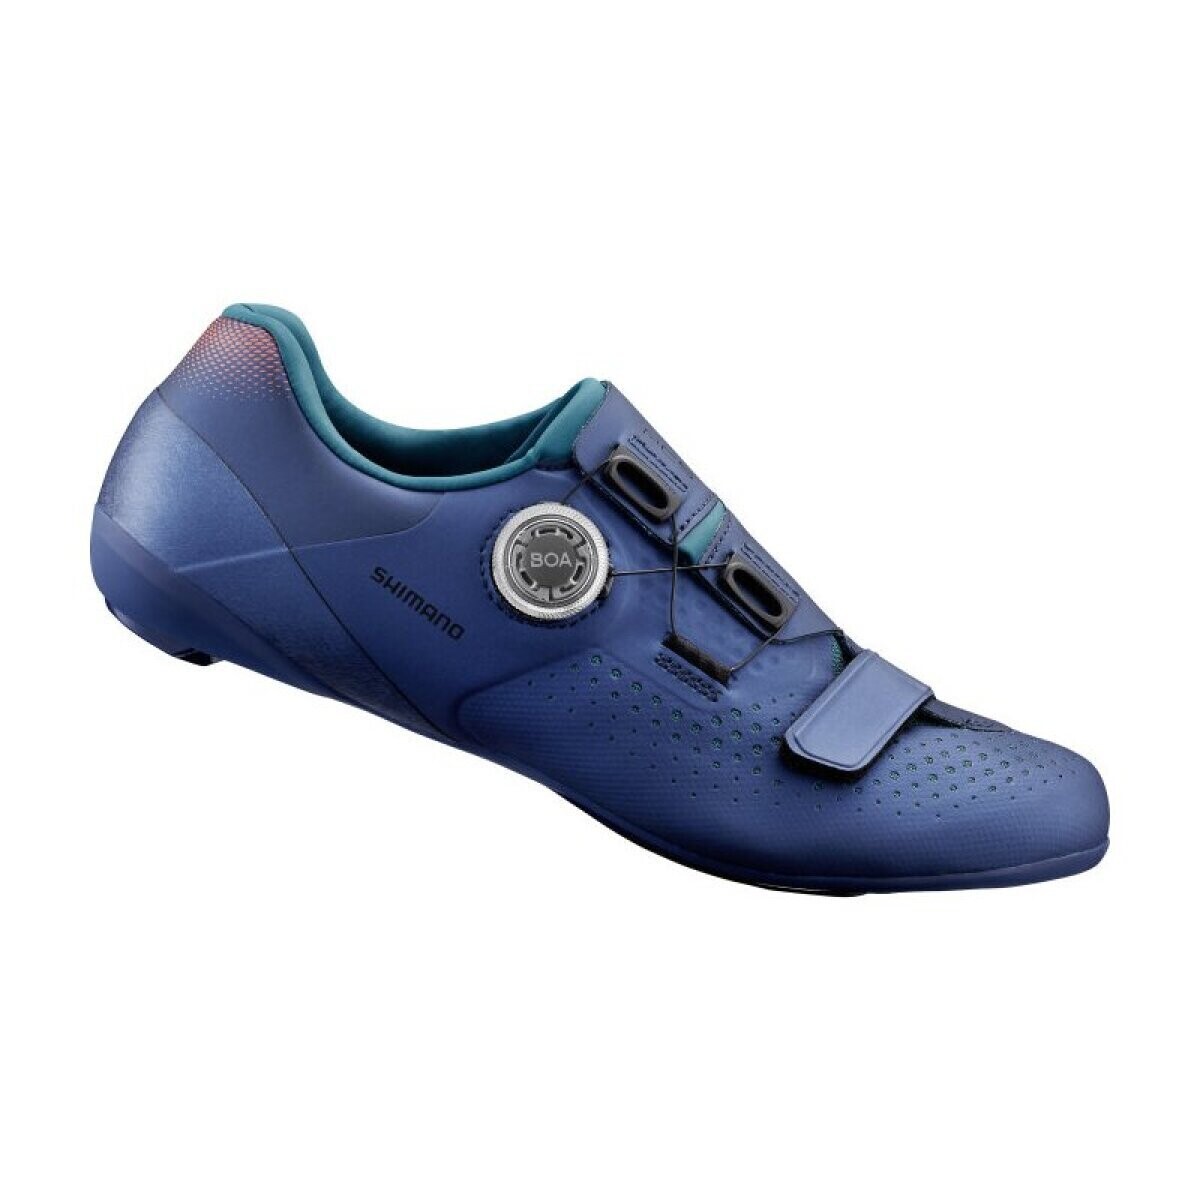 SH-RC500W, Color: Navy, Size: 36